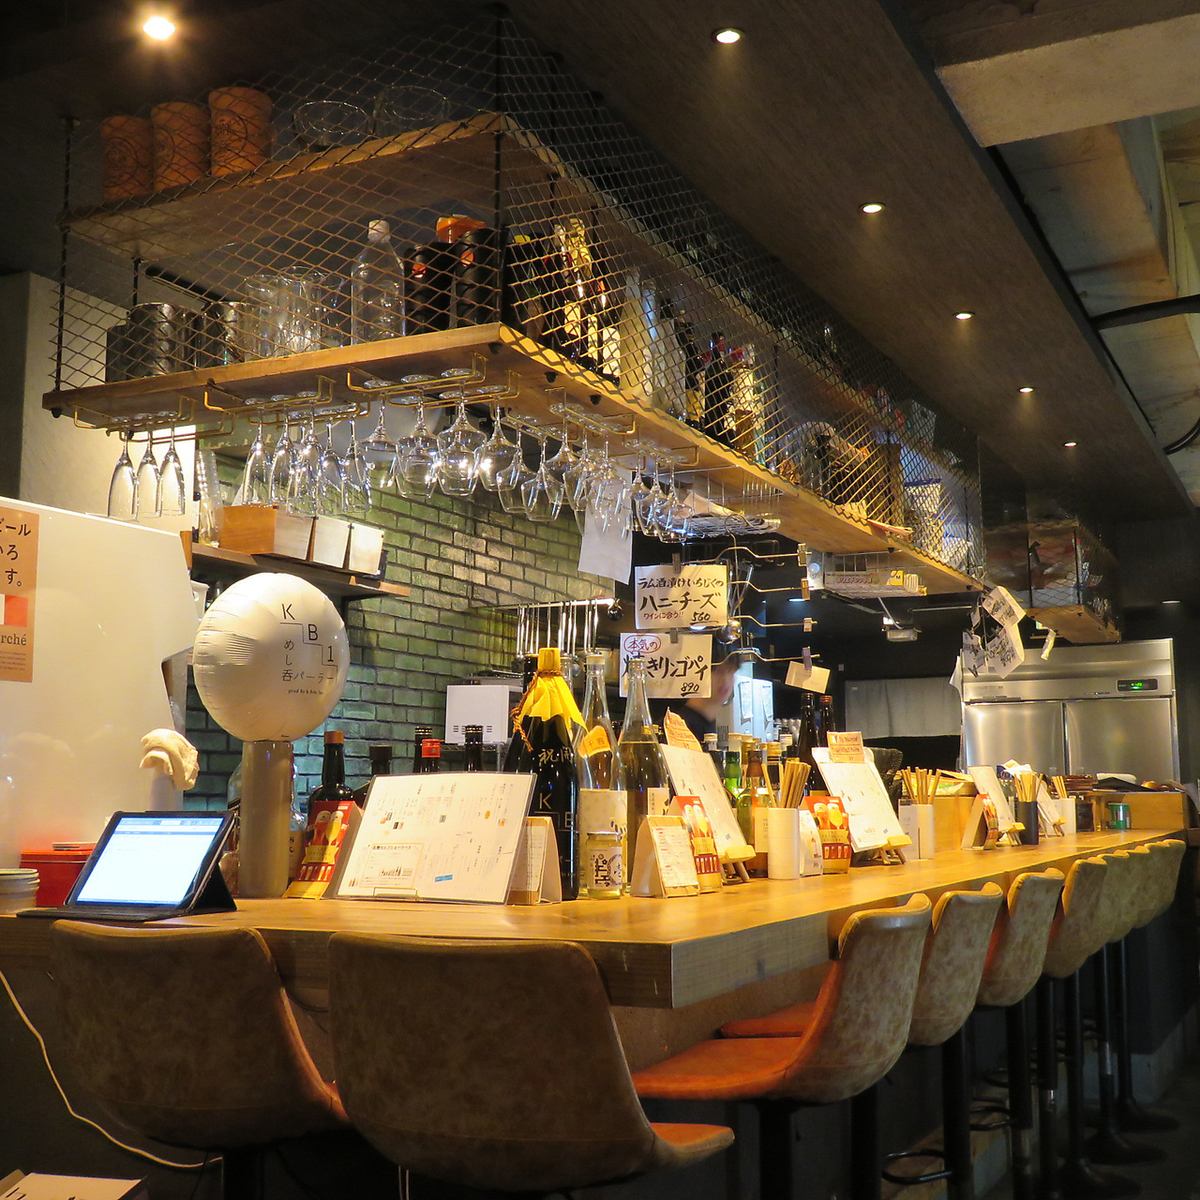 Enjoy our carefully selected dishes in a stylish space♪